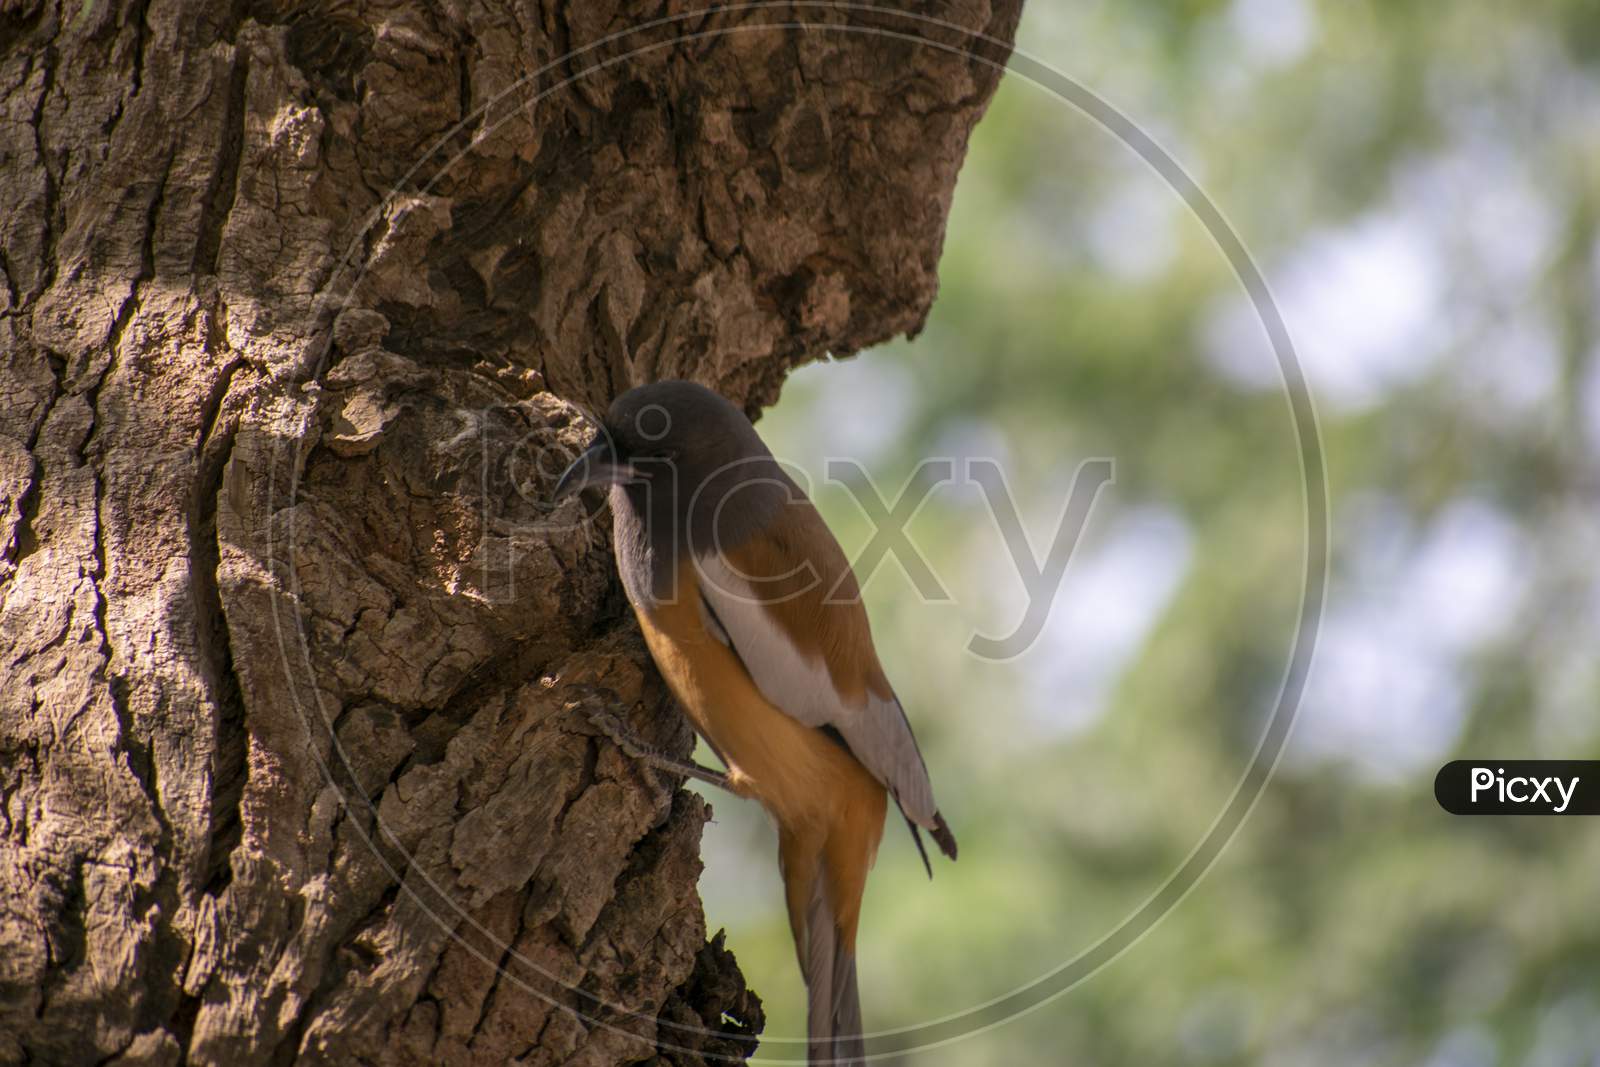 The Rufous Treepie Is A Treepie, Native To The Indian Subcontinent